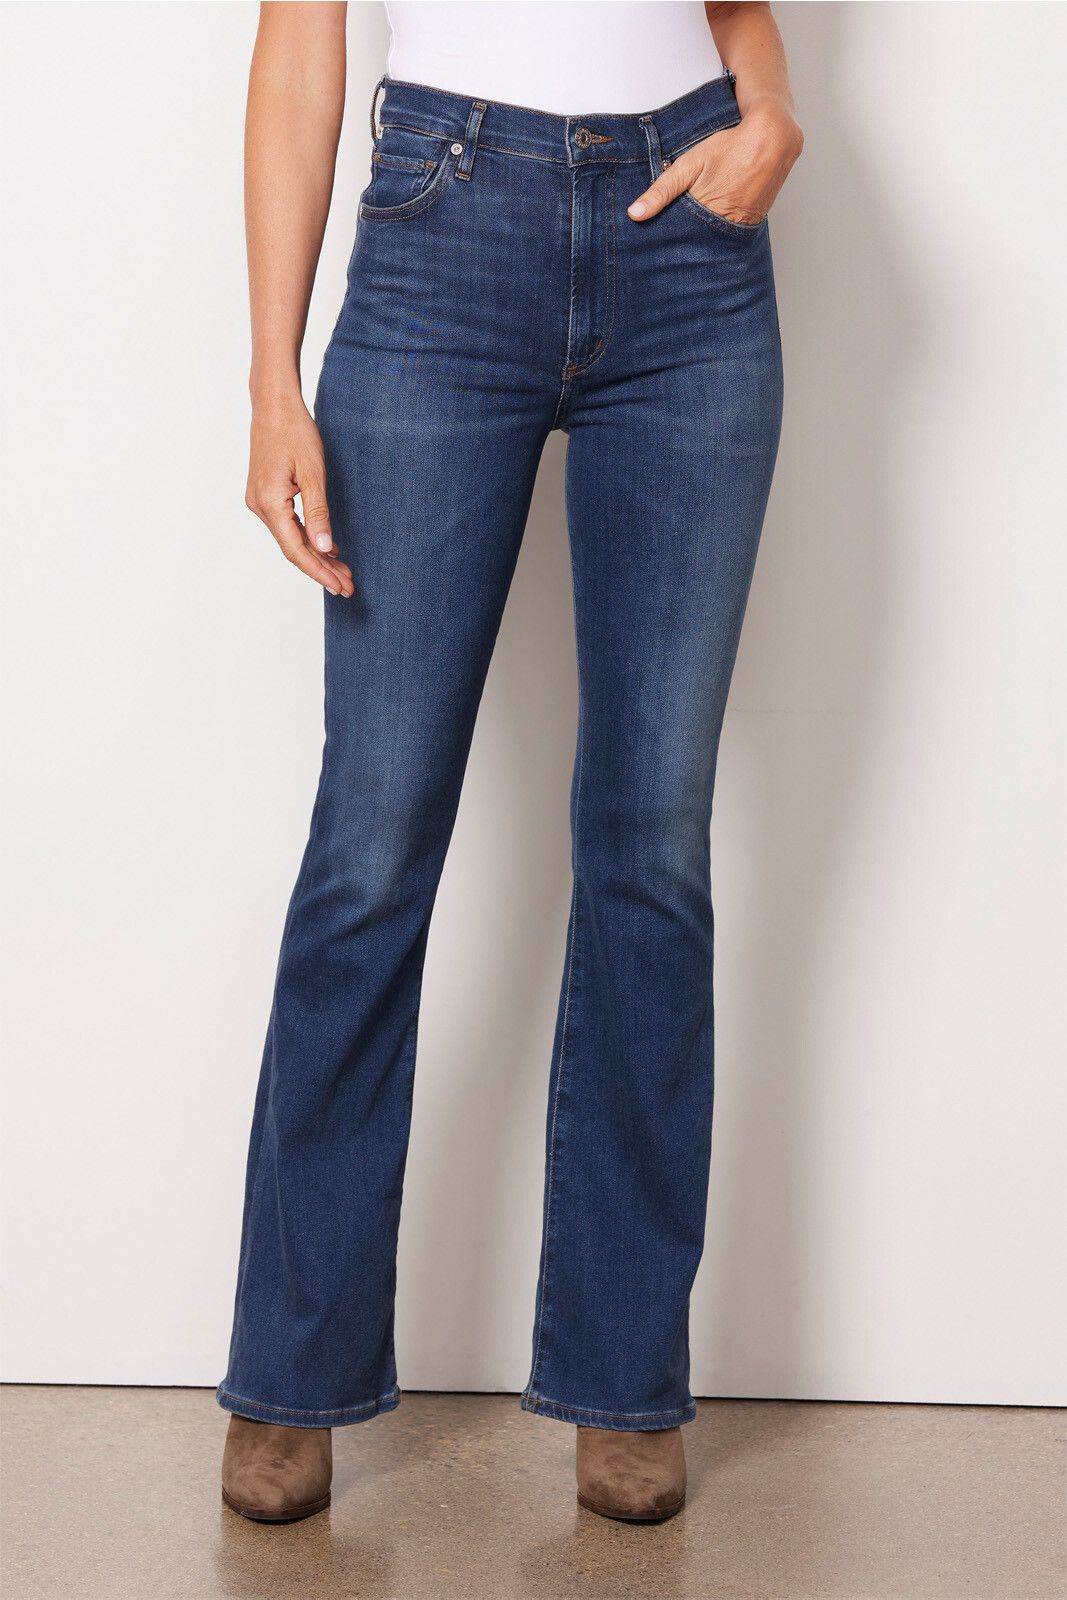 CITIZENS OF HUMANITY Lilah Bootcut Jean | EVEREVE | Evereve